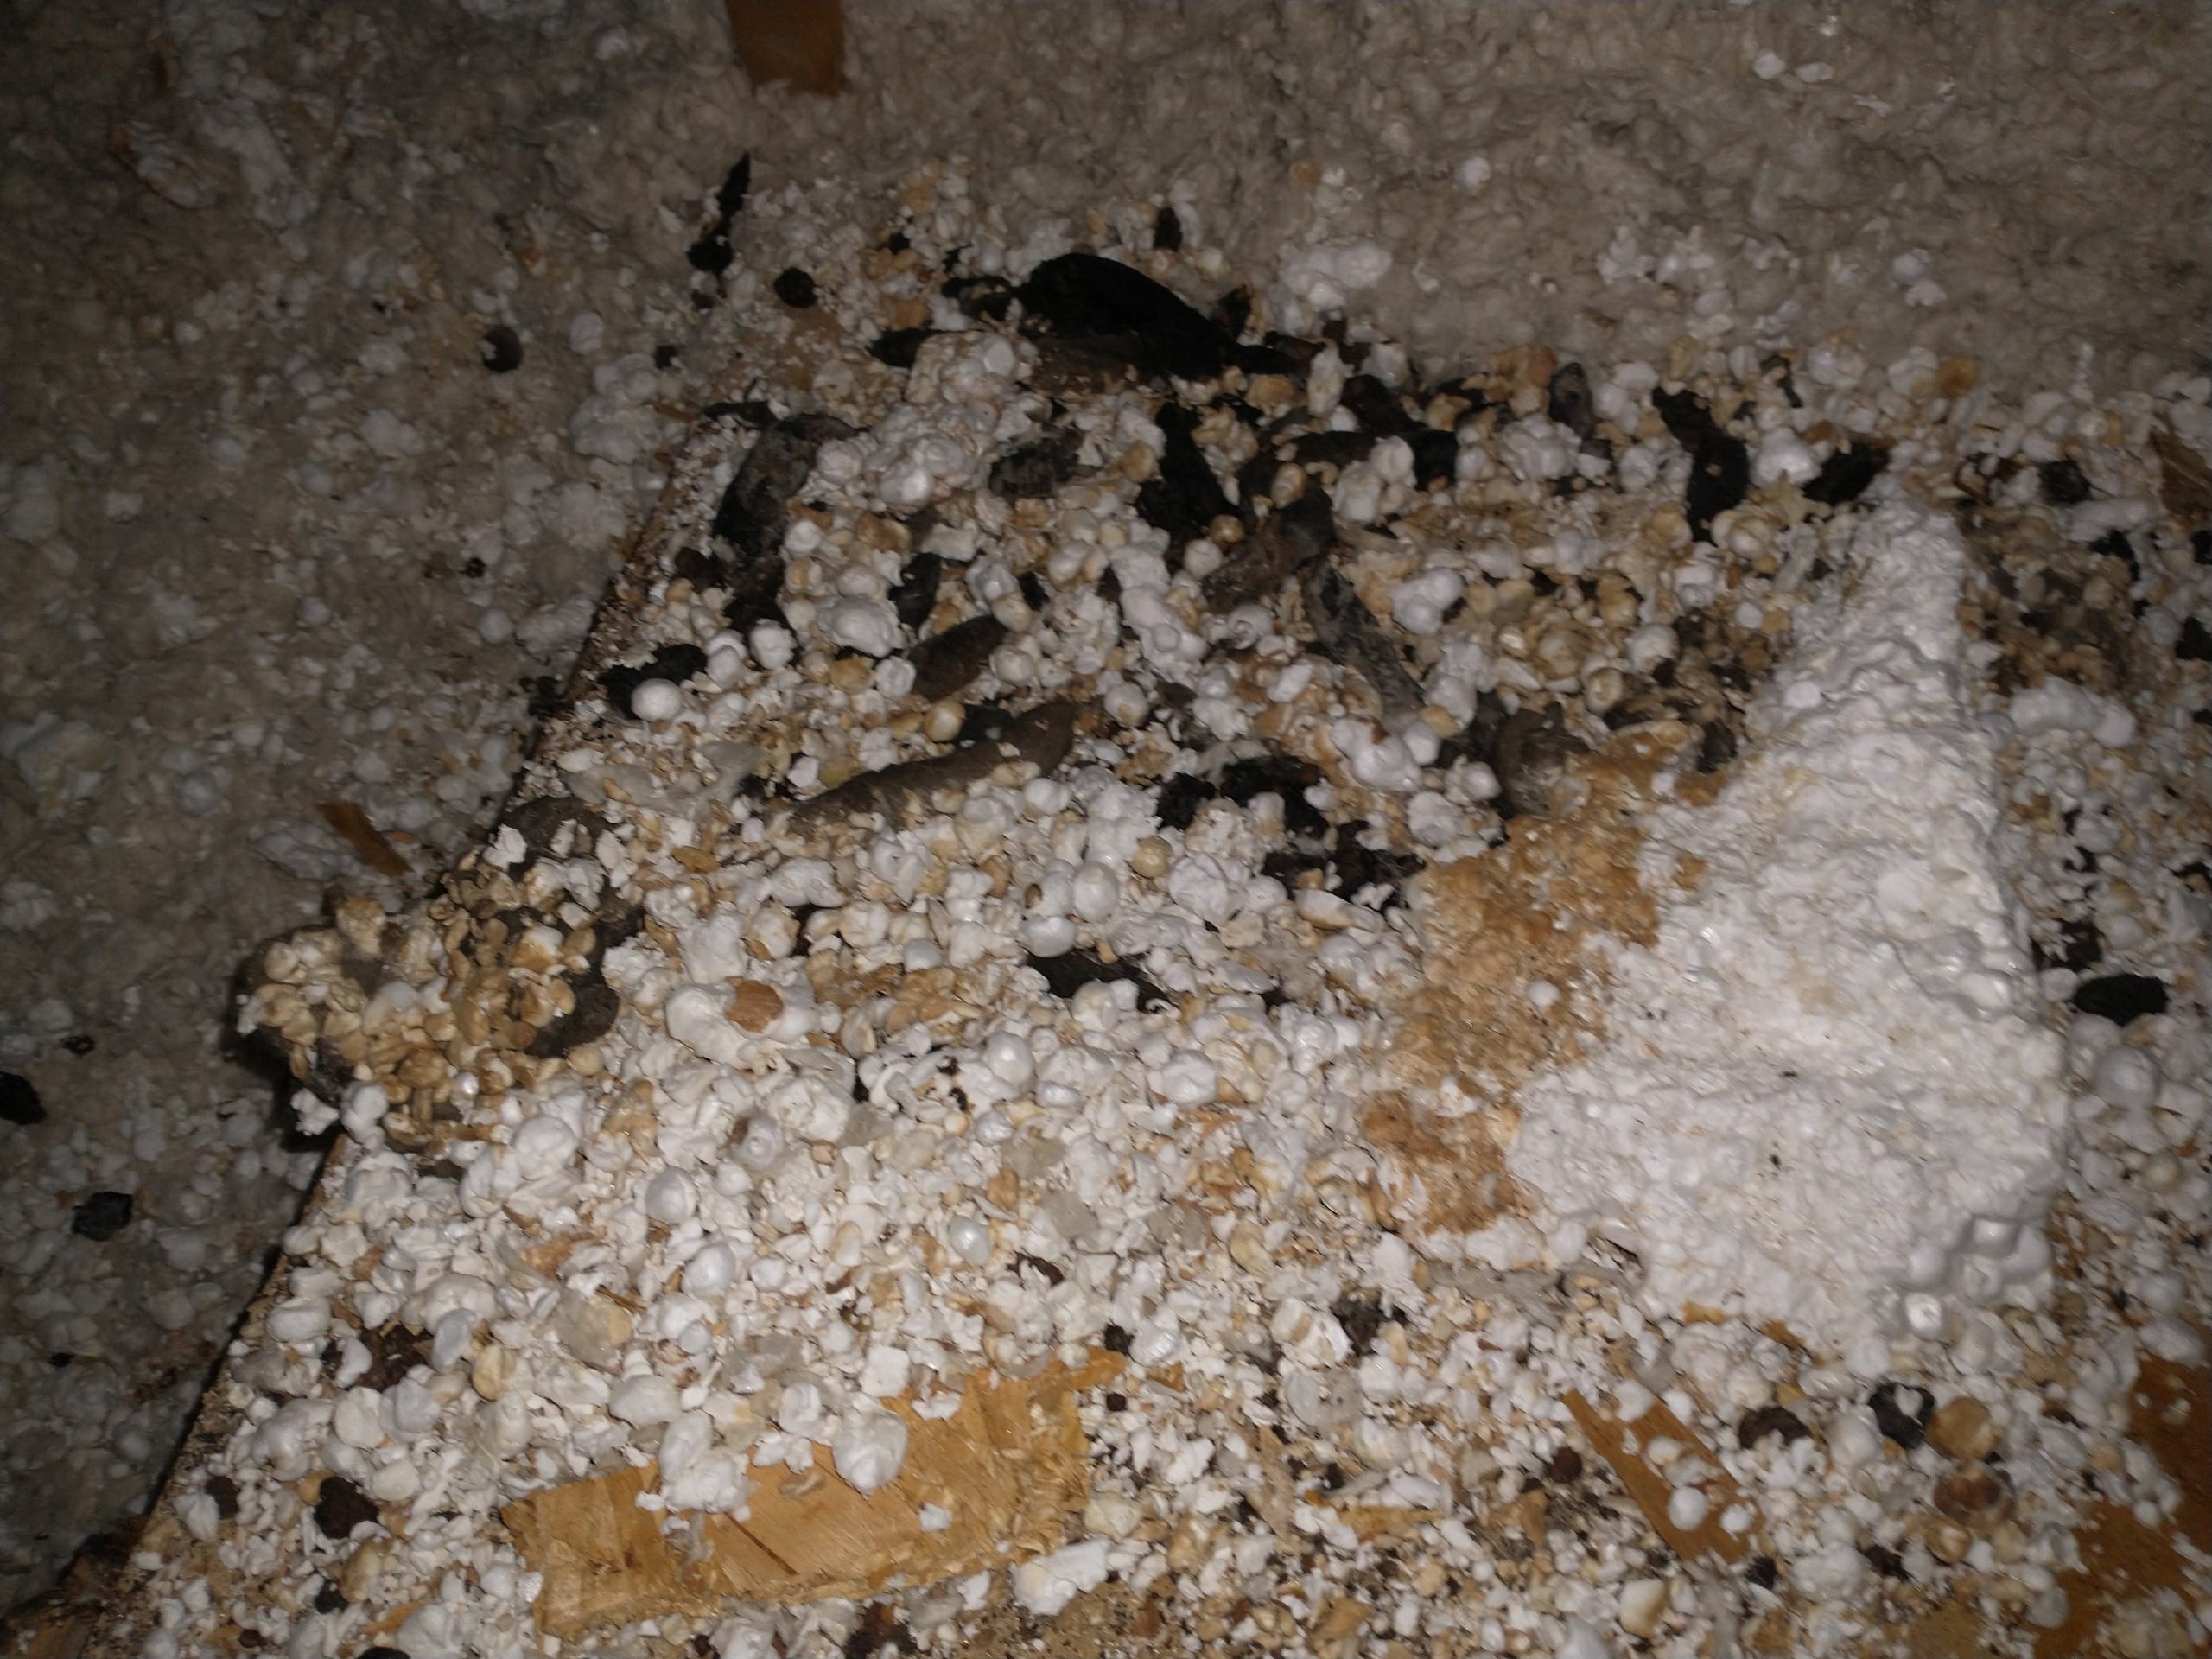 The inspection of the home's attic revealed raccoon feces